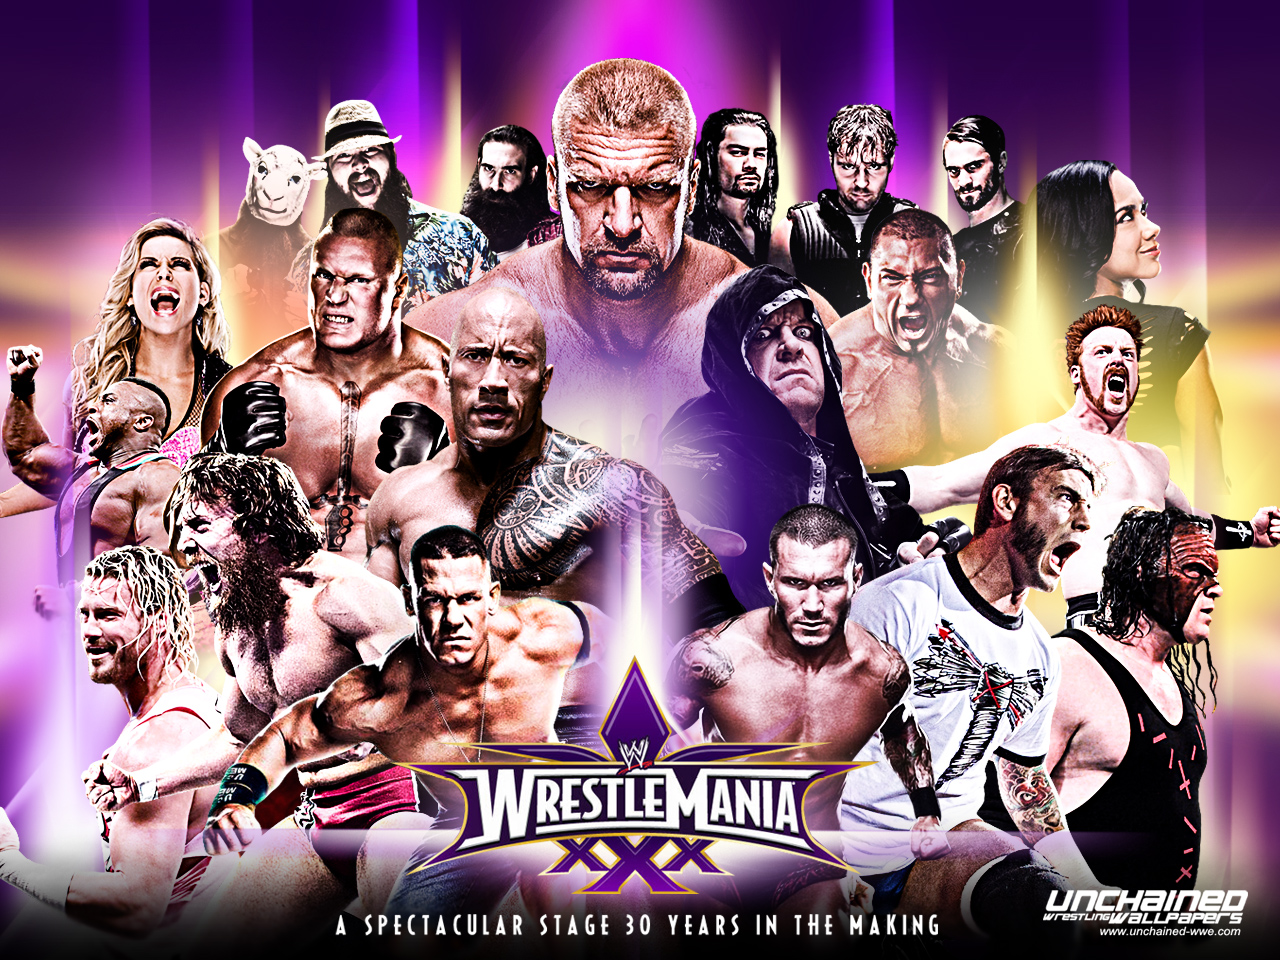 Wwe Wrestlemania 30 Years In The Making Wwe 壁紙 ファンポップ